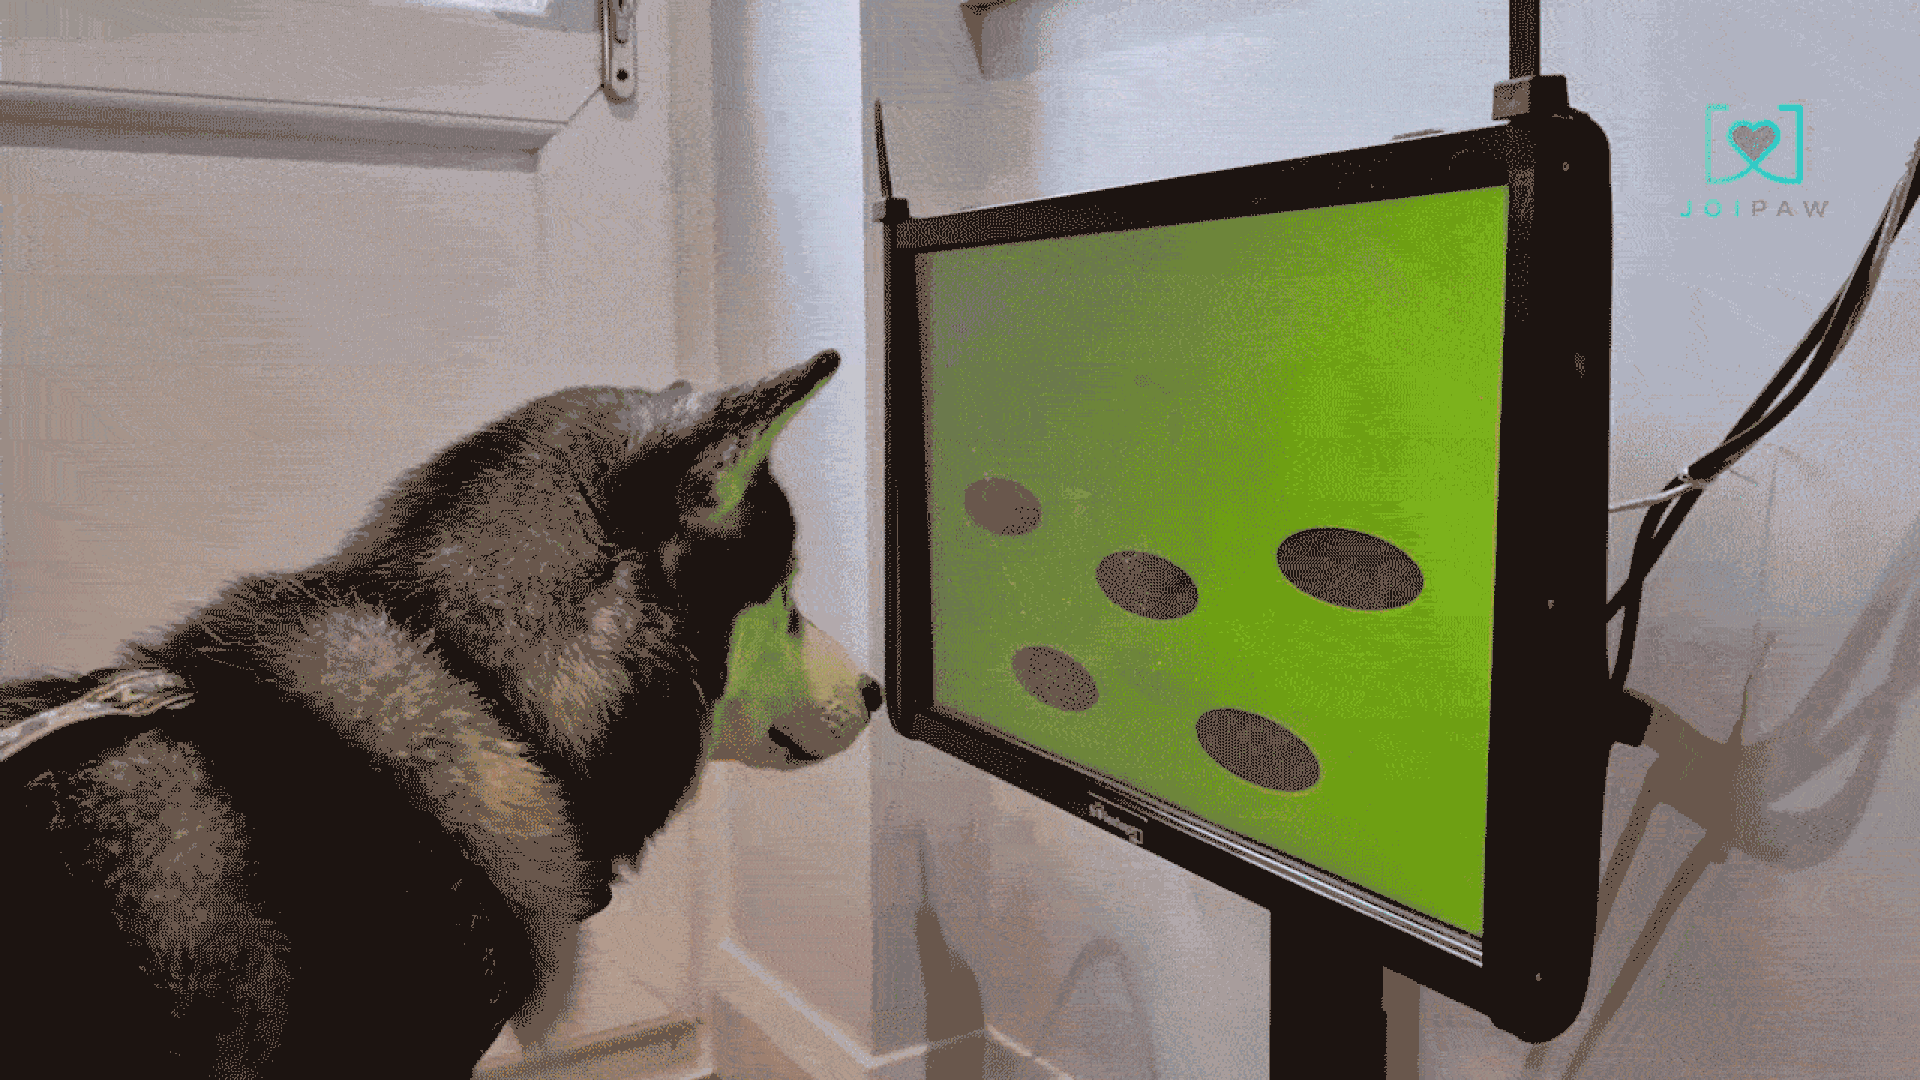 Dog plays whack-a-mole type video game by pointing with its snout.